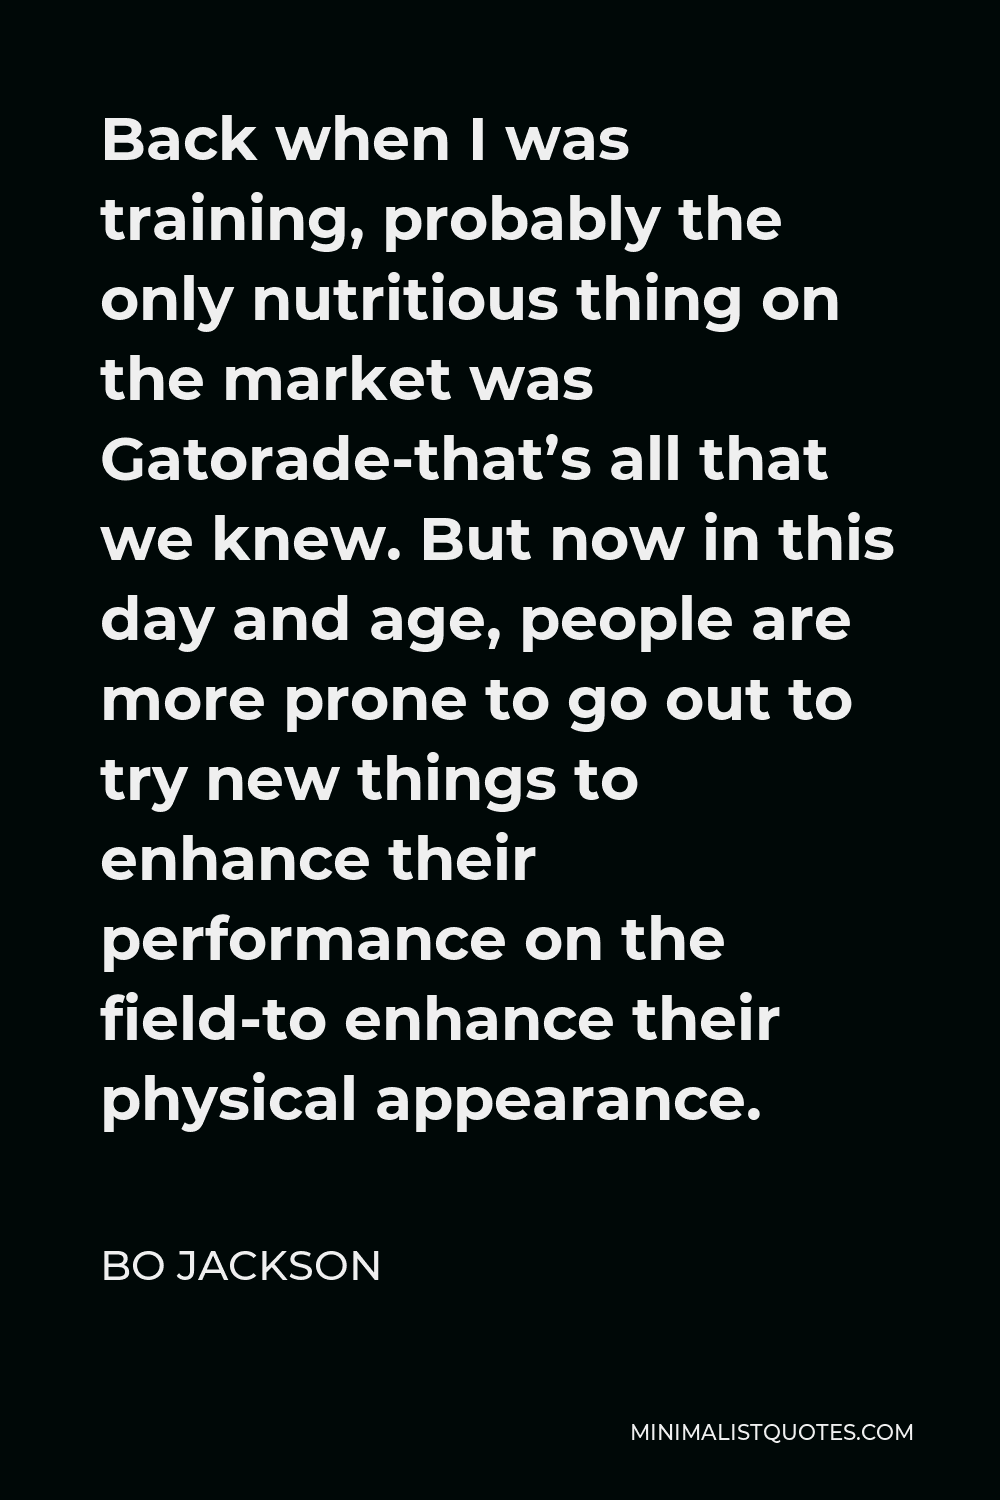 Bo Jackson Quote - Back when I was training, probably the only nutritious thing on the market was Gatorade-that’s all that we knew. But now in this day and age, people are more prone to go out to try new things to enhance their performance on the field-to enhance their physical appearance.